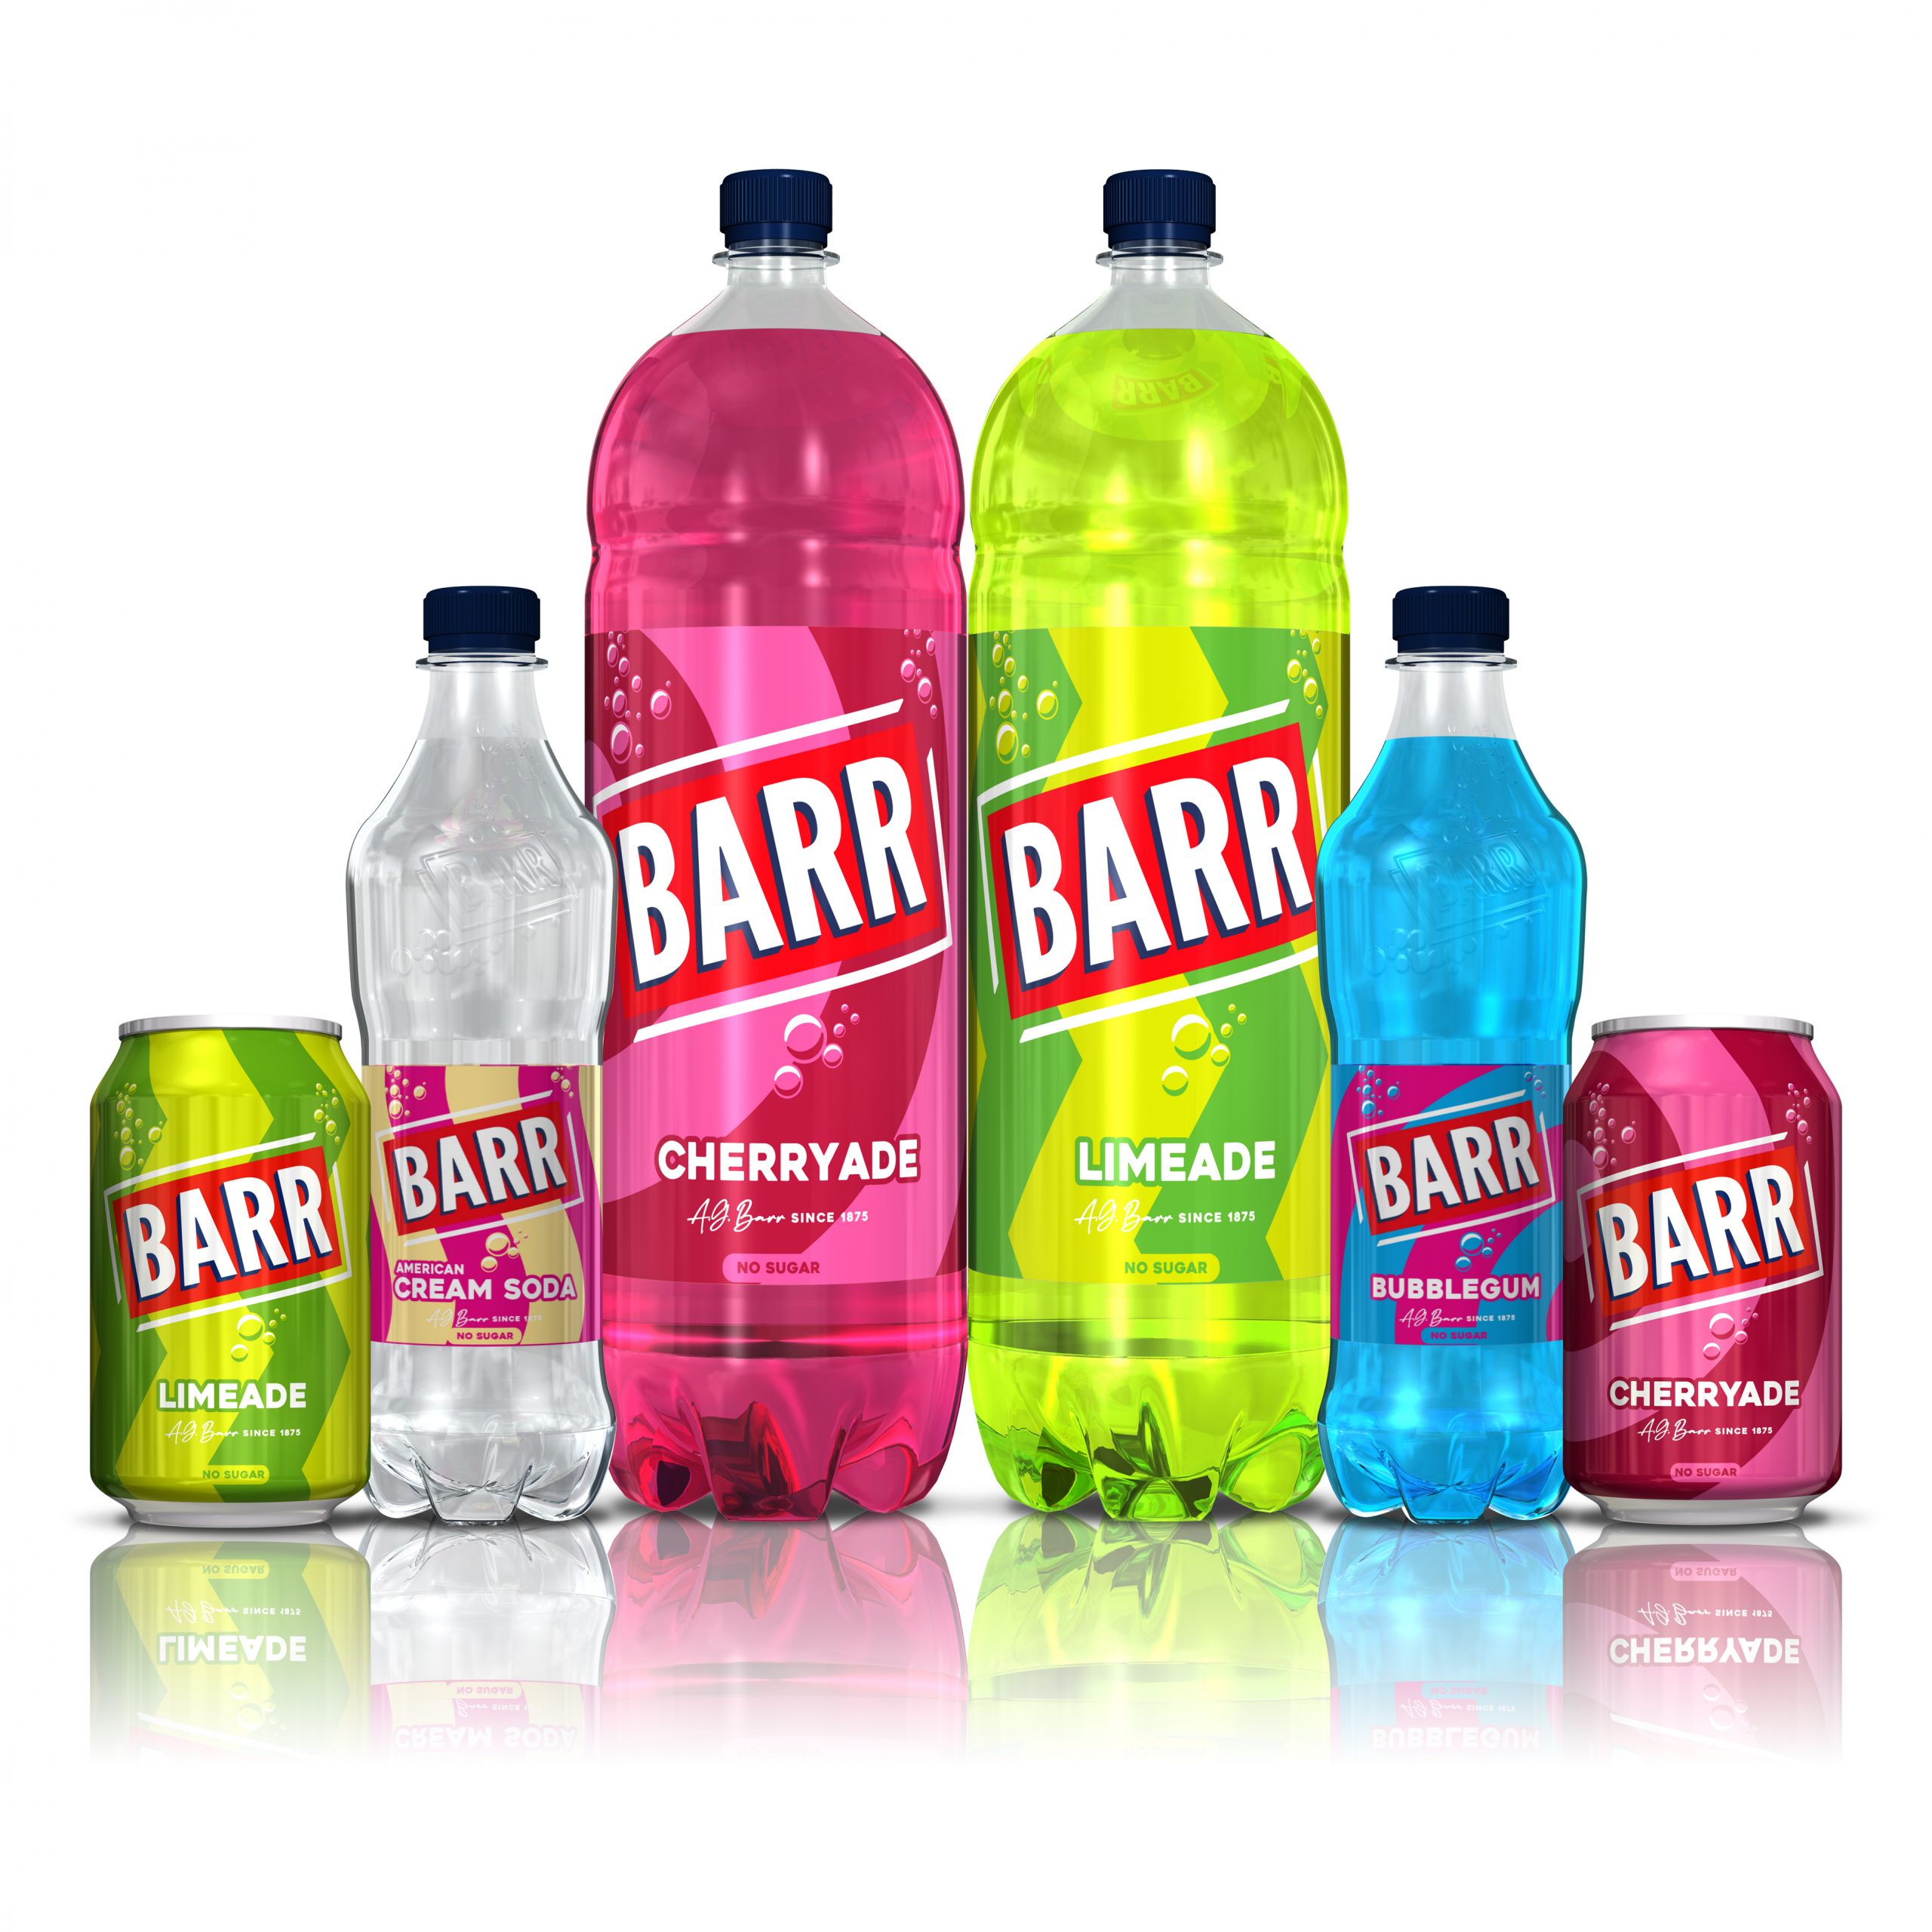 New-look Barr Family Range ‘fizzes with fun, flavour and value!’